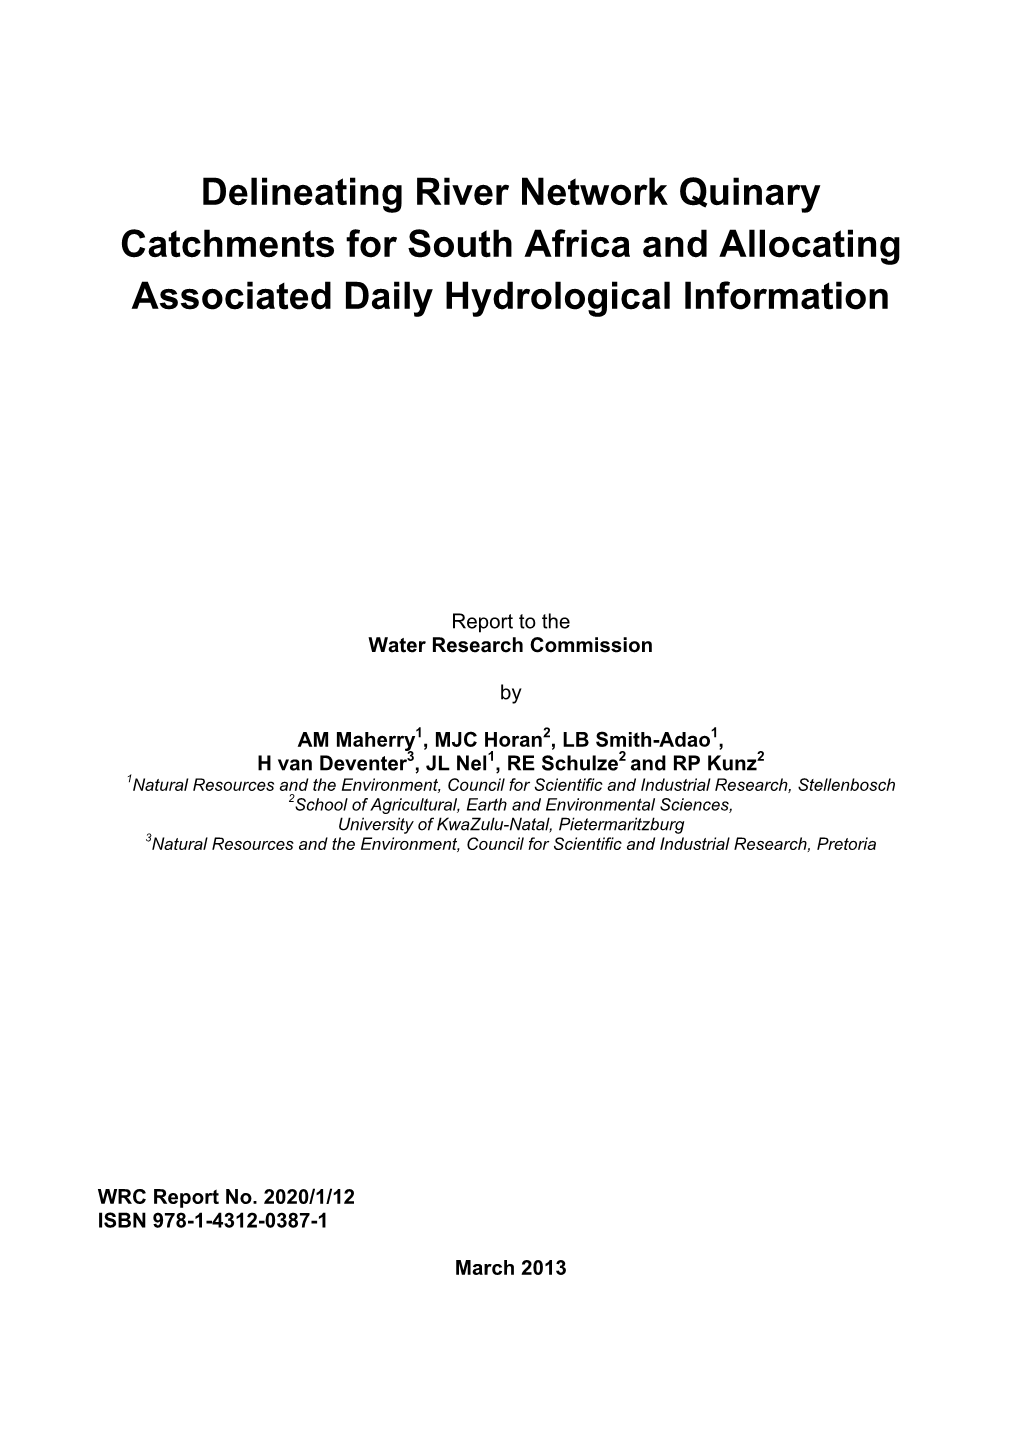 Delineating River Network Quinary Catchments for South Africa and Allocating Associated Daily Hydrological Information